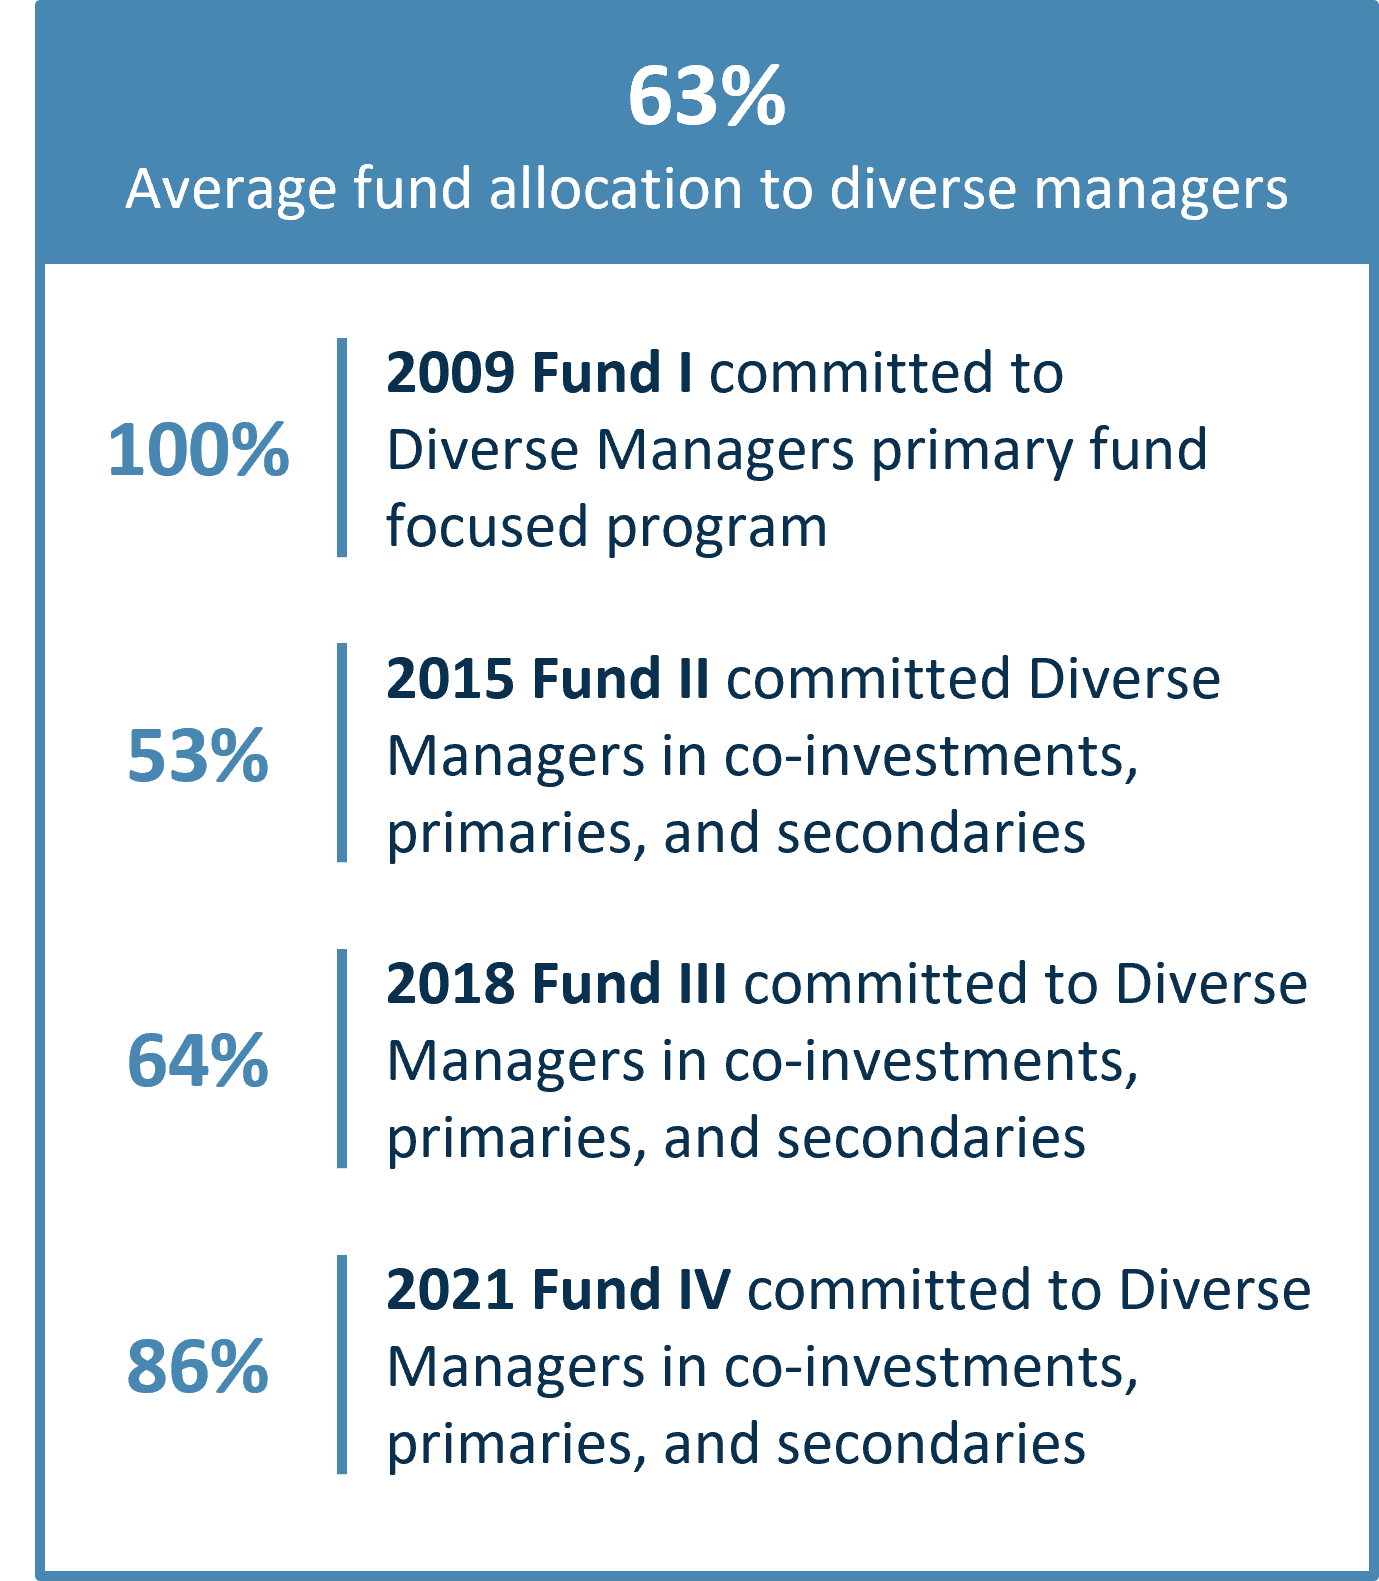 63% average fund allocation to diverse managers